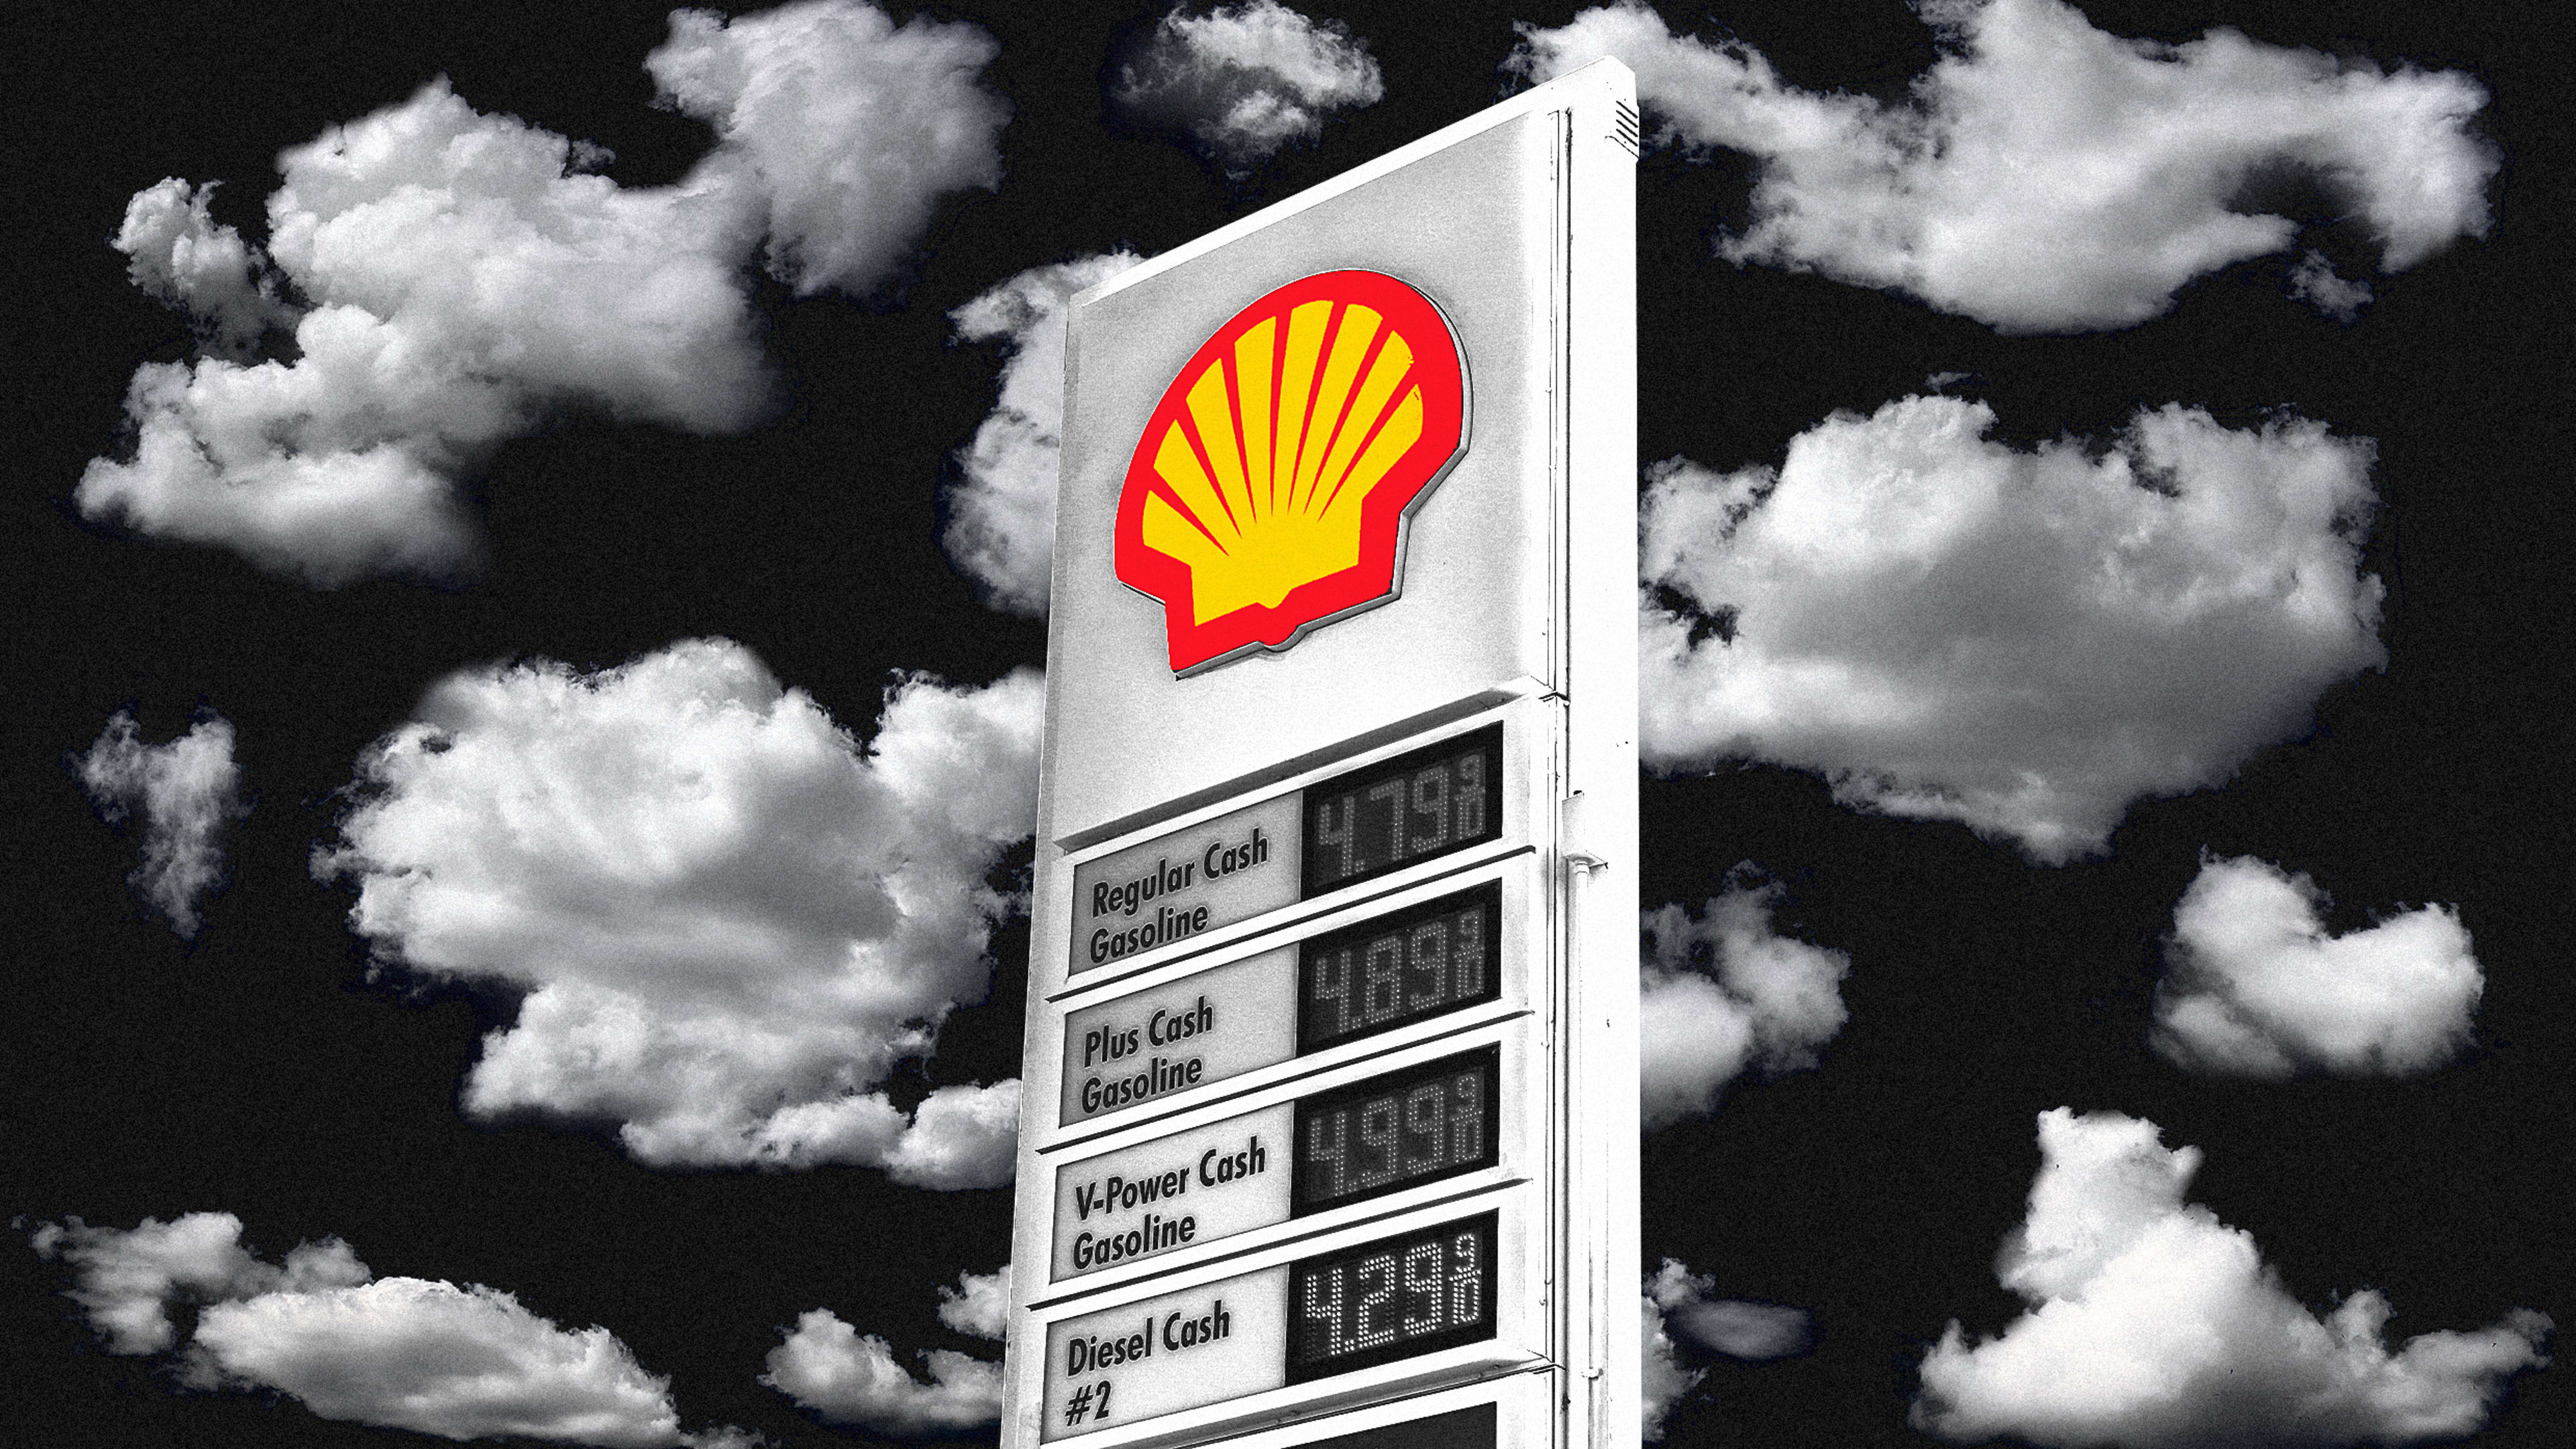 A Dutch court just told oil giant Shell to cut emissions faster